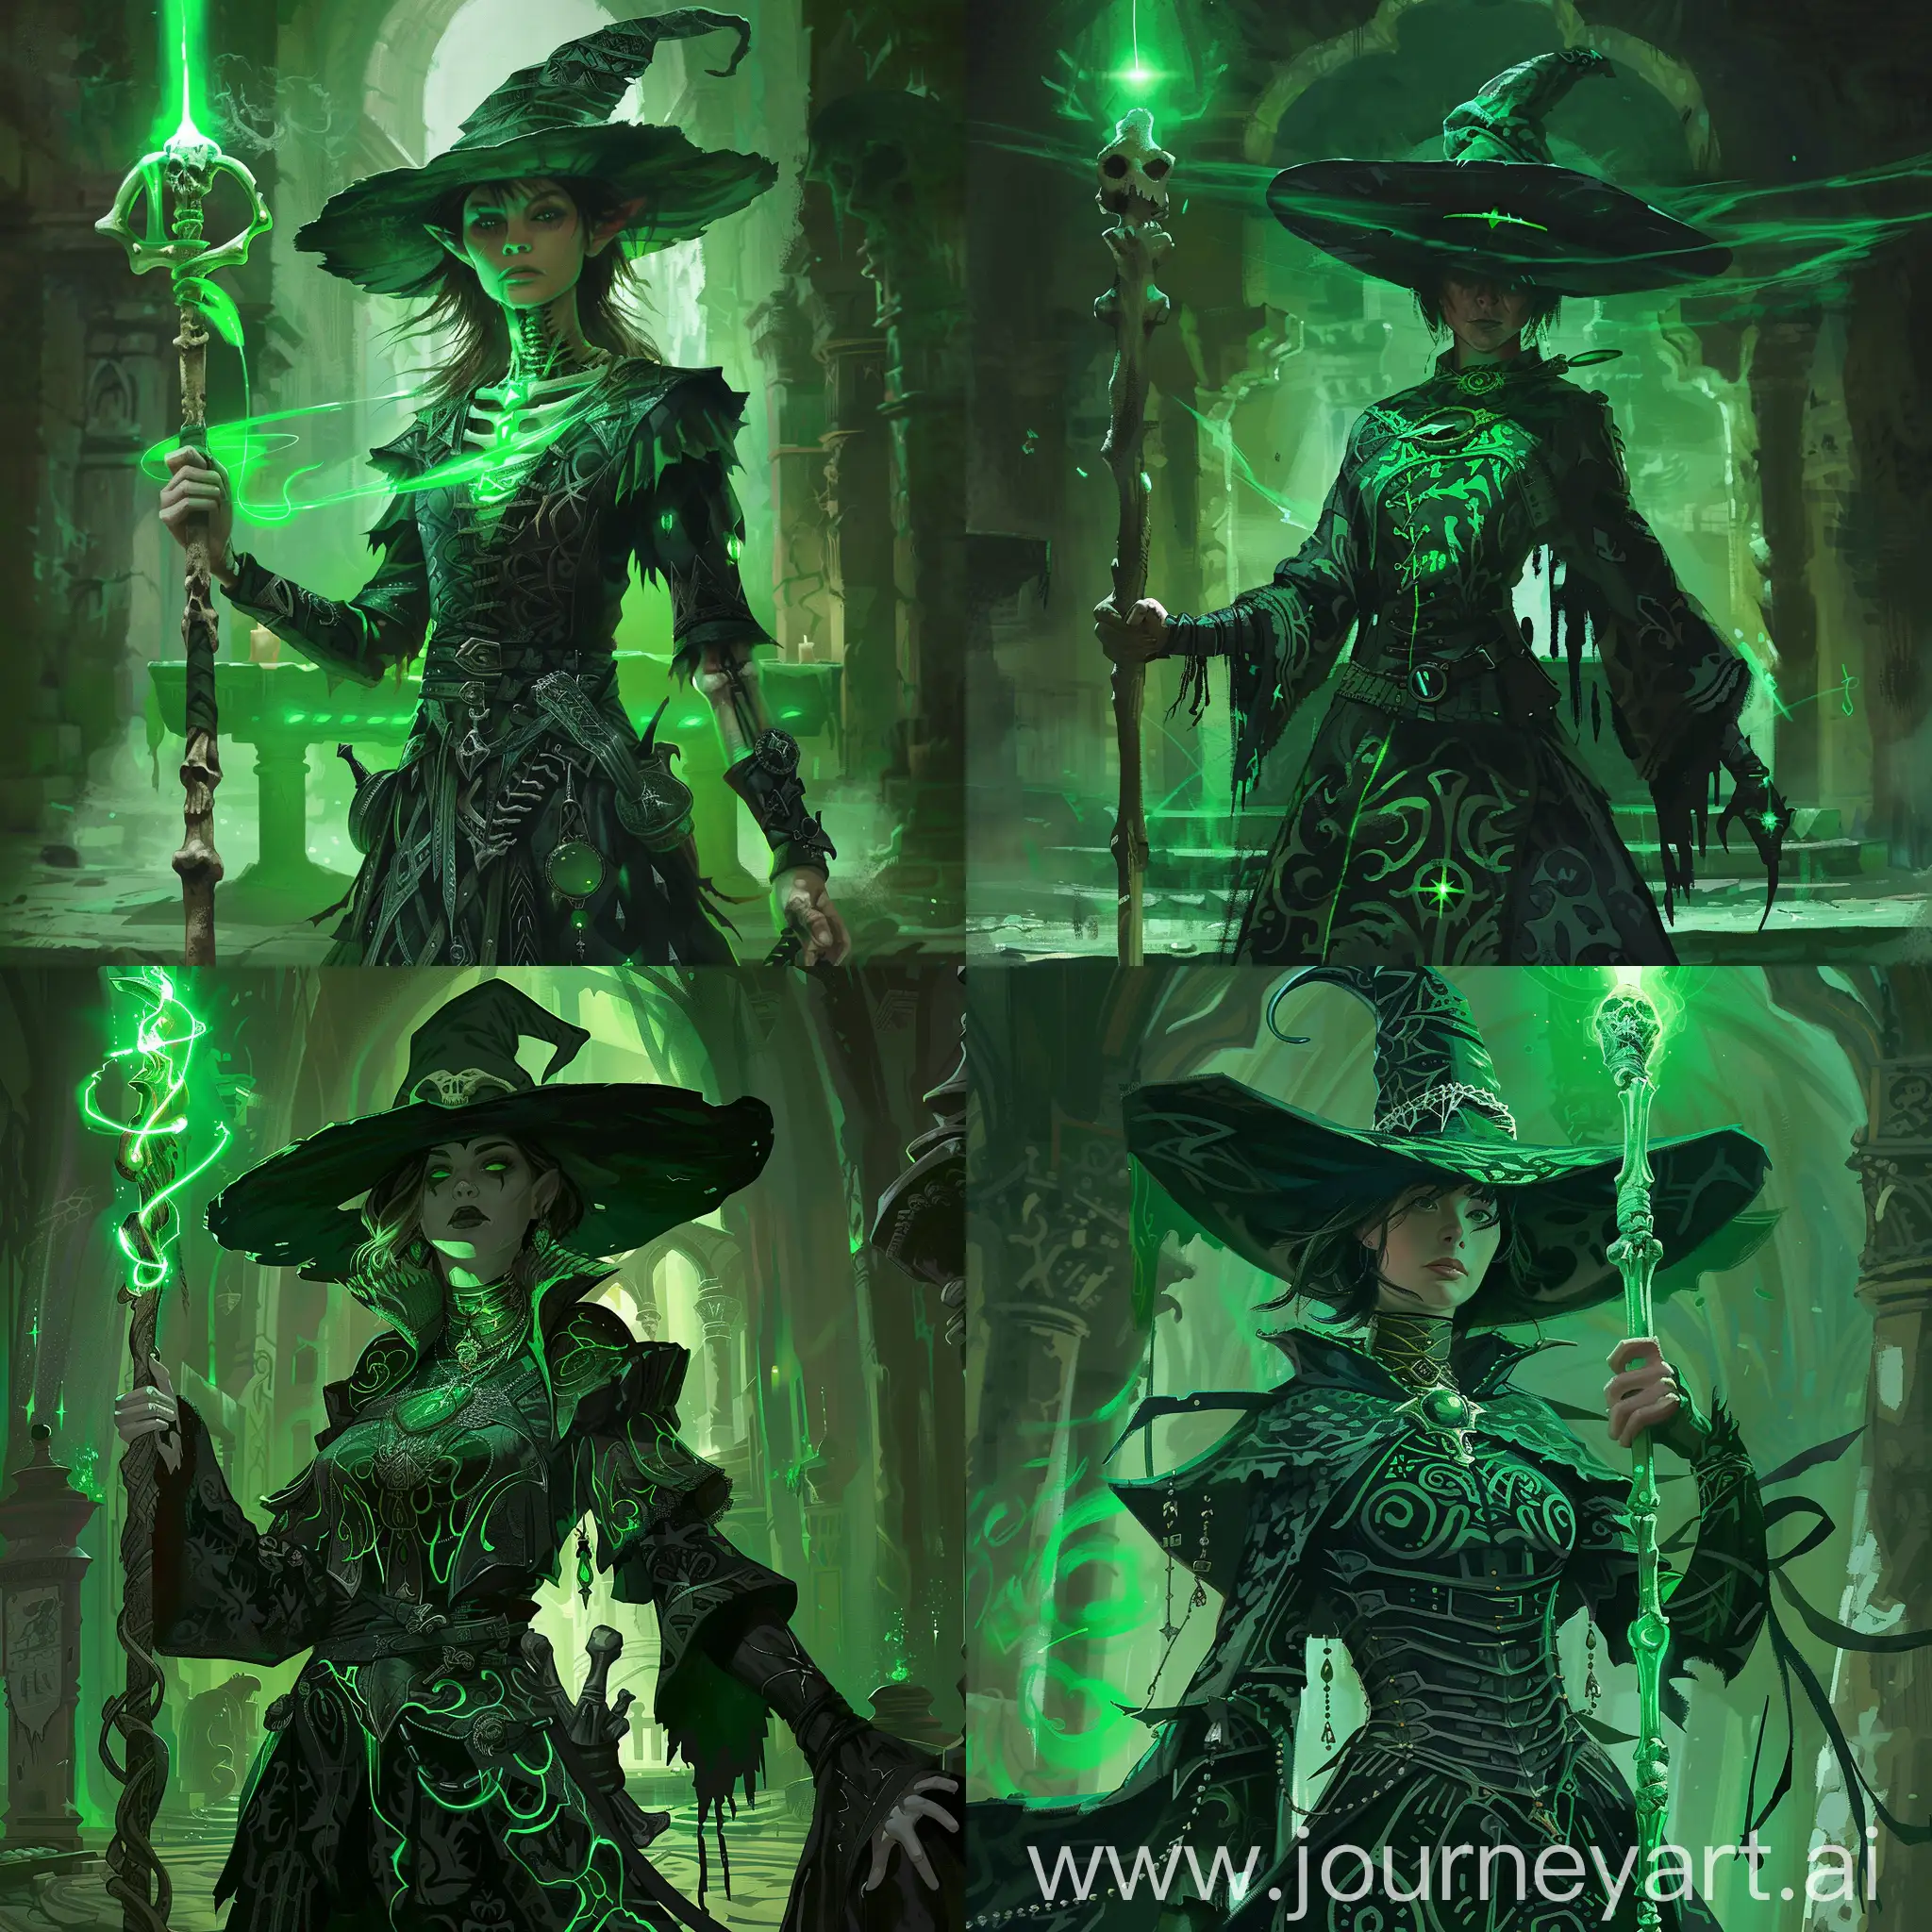 dnd dark fantasy theme,a witch wearing a dark green rob with black patterns,has a dark green hat.holding a staff made from bones with green light top of it.She is female.background is green altar in catacombs.